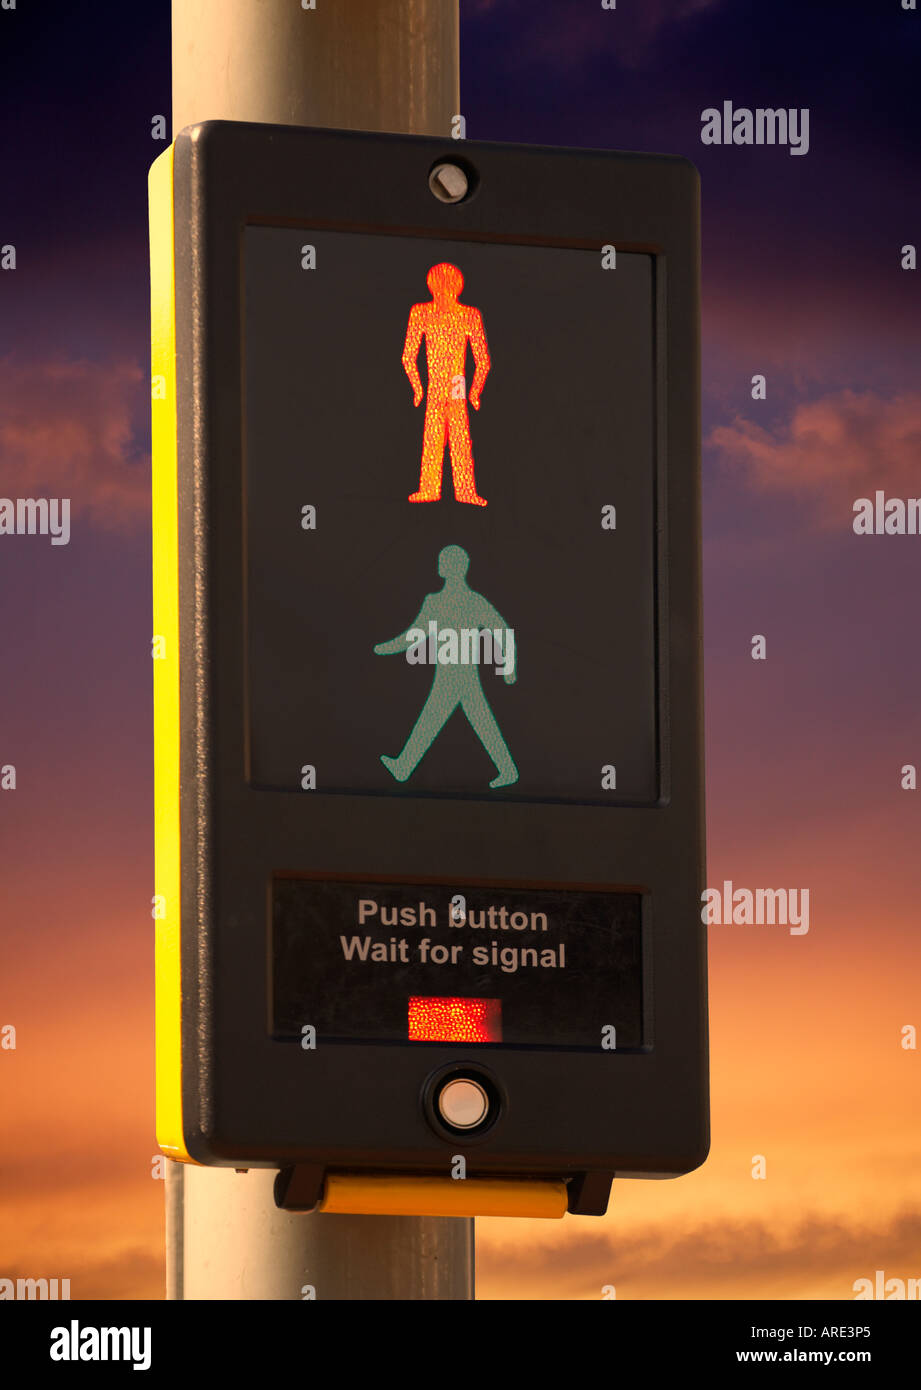 PEDESTRIAN CROSSING CONTROL BOX WITH ILLUMINATED ICON OF STANDING RED MAN AT TWILIGHT Stock Photo